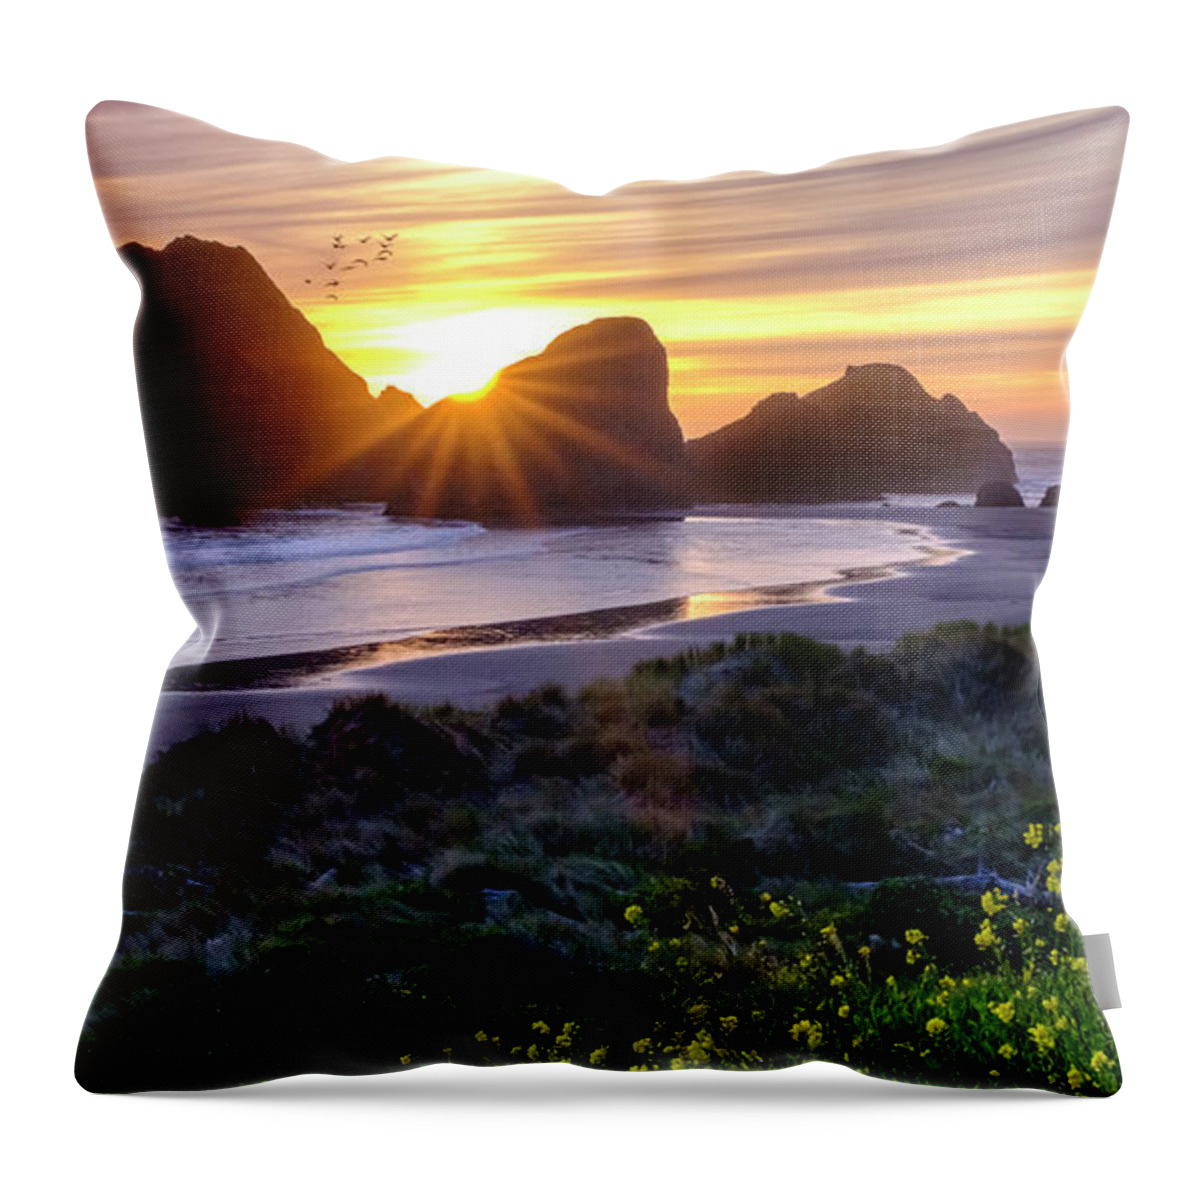 Sunset Throw Pillow featuring the photograph Oregon Coastline Sunset Behind A Large Rock Formations by Tony Locke